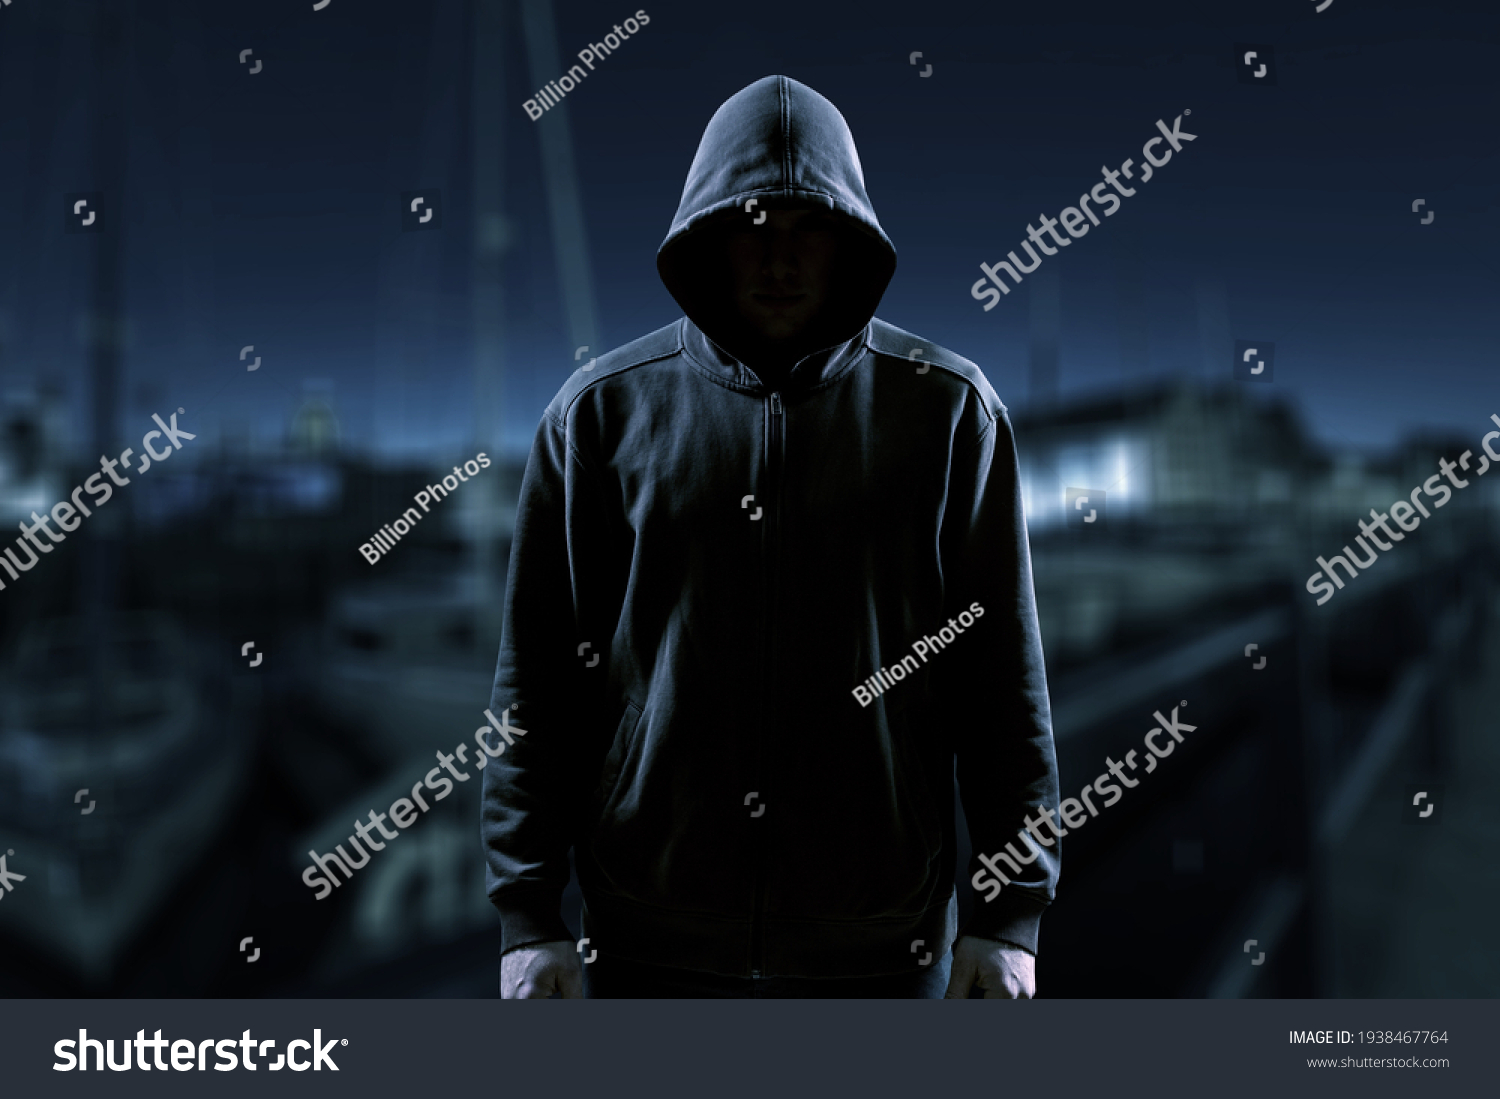 Man silhouette in the misty alley at night city, alone stalker or crime person #1938467764